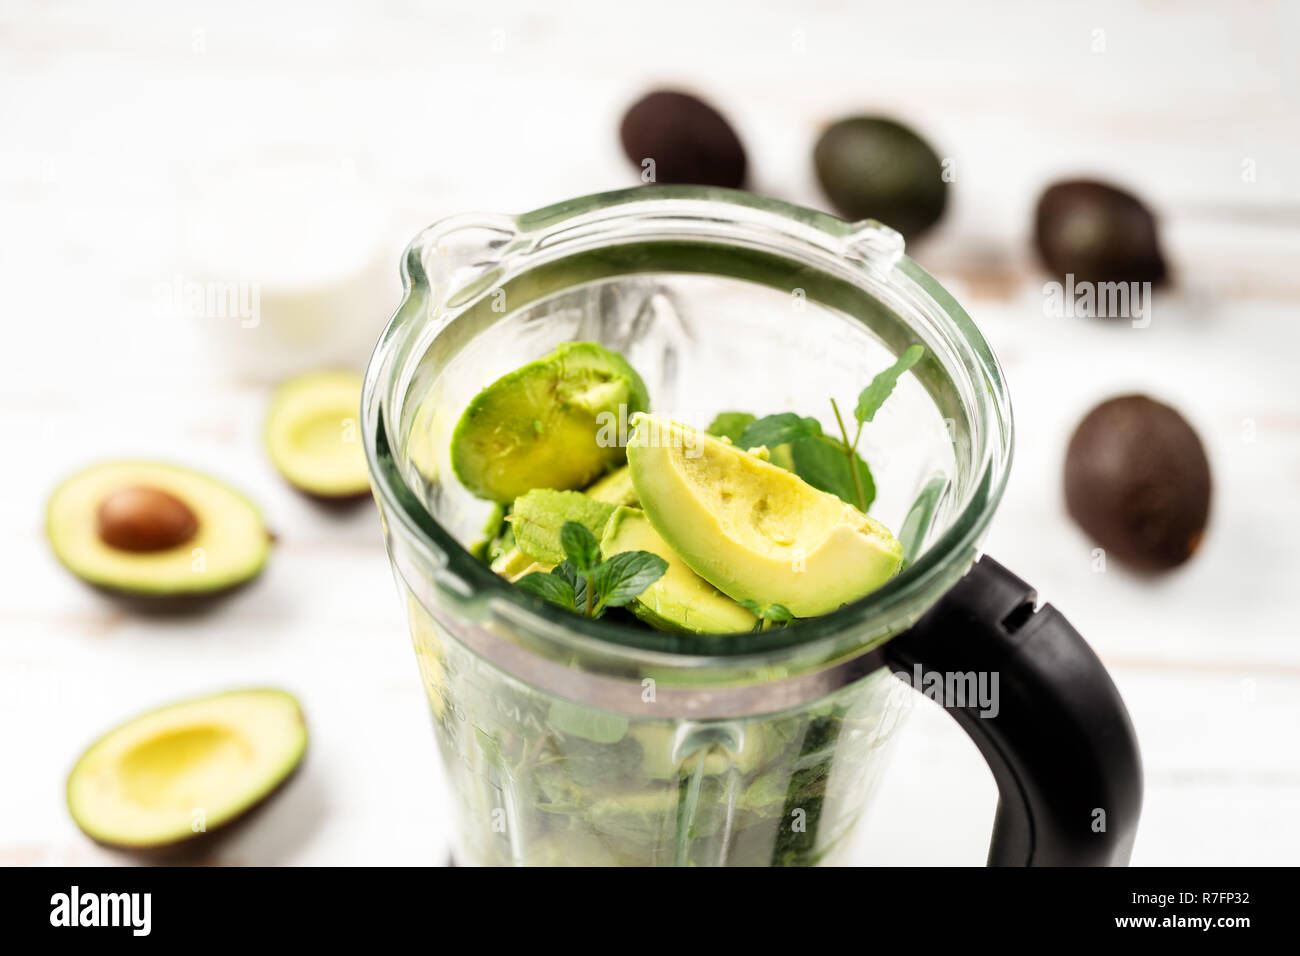 Top view of blender with avocado peaces Stock Photo